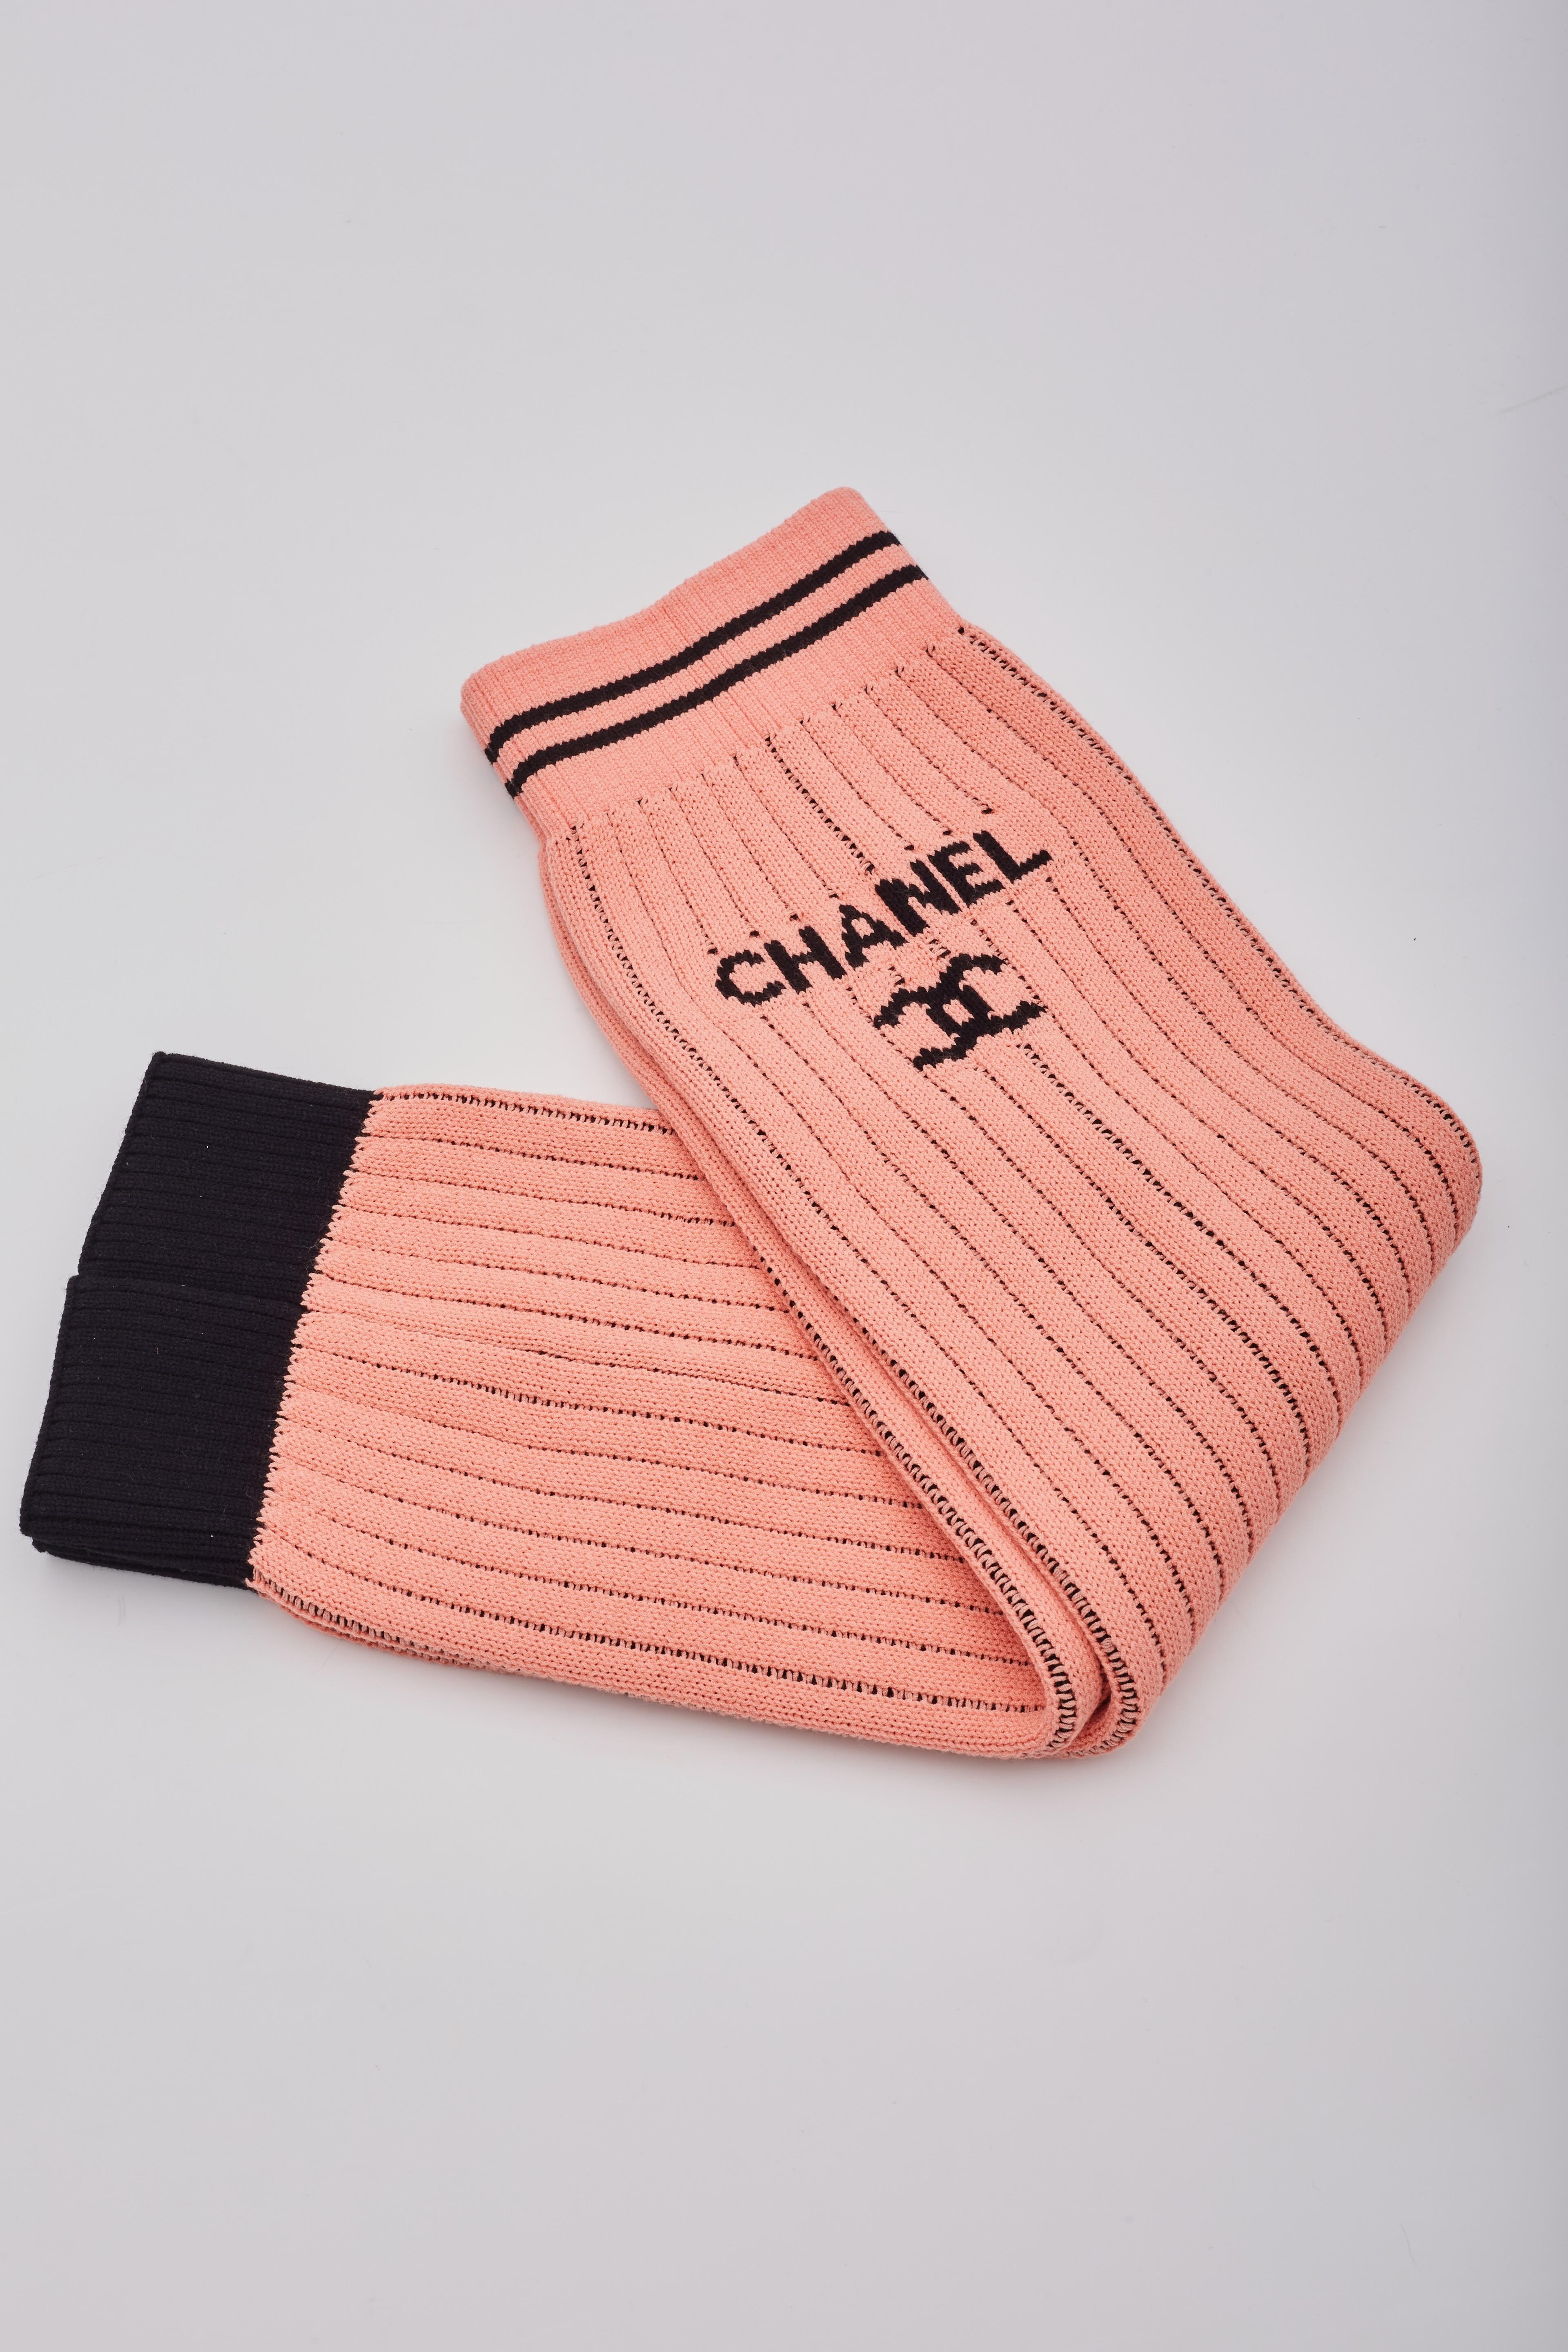 Chanel Logo Apricot Knit Leg Warmers Gaiters For Sale 1